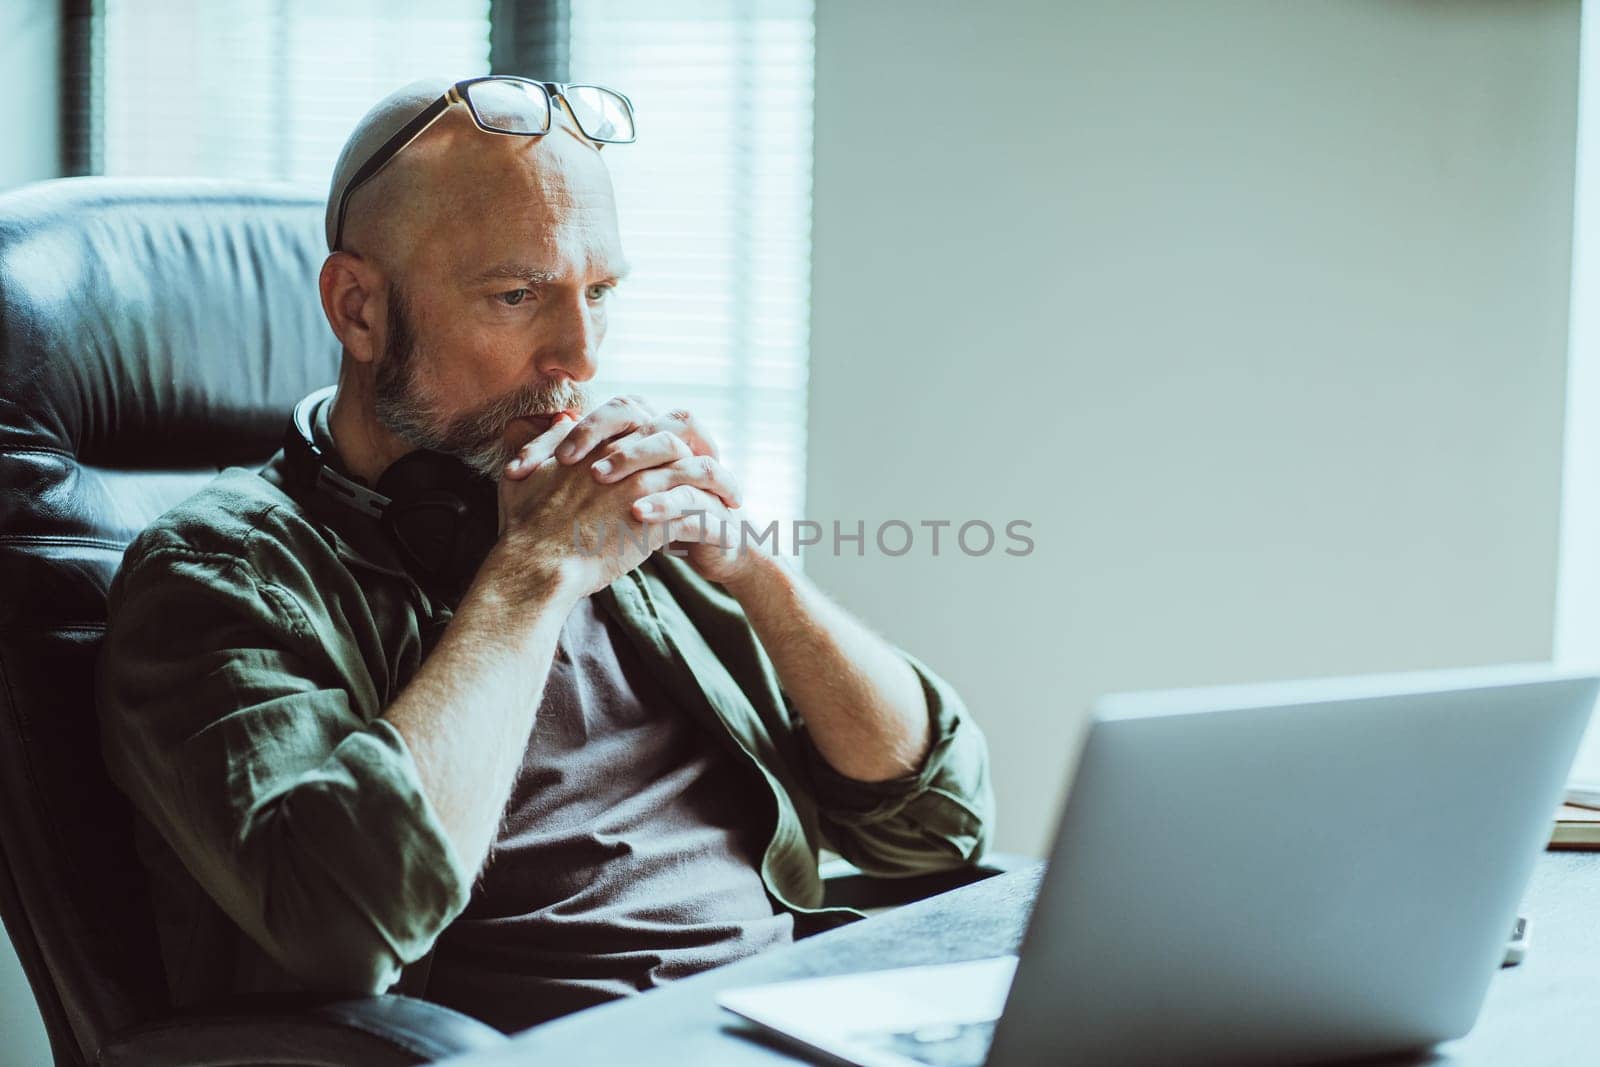 Middle-aged man fully focused on work he looks intently at computer on table. Deep in thought, he reflects on task or problem at hand, demonstrating his analytical and strategic thinking skills. . High quality photo